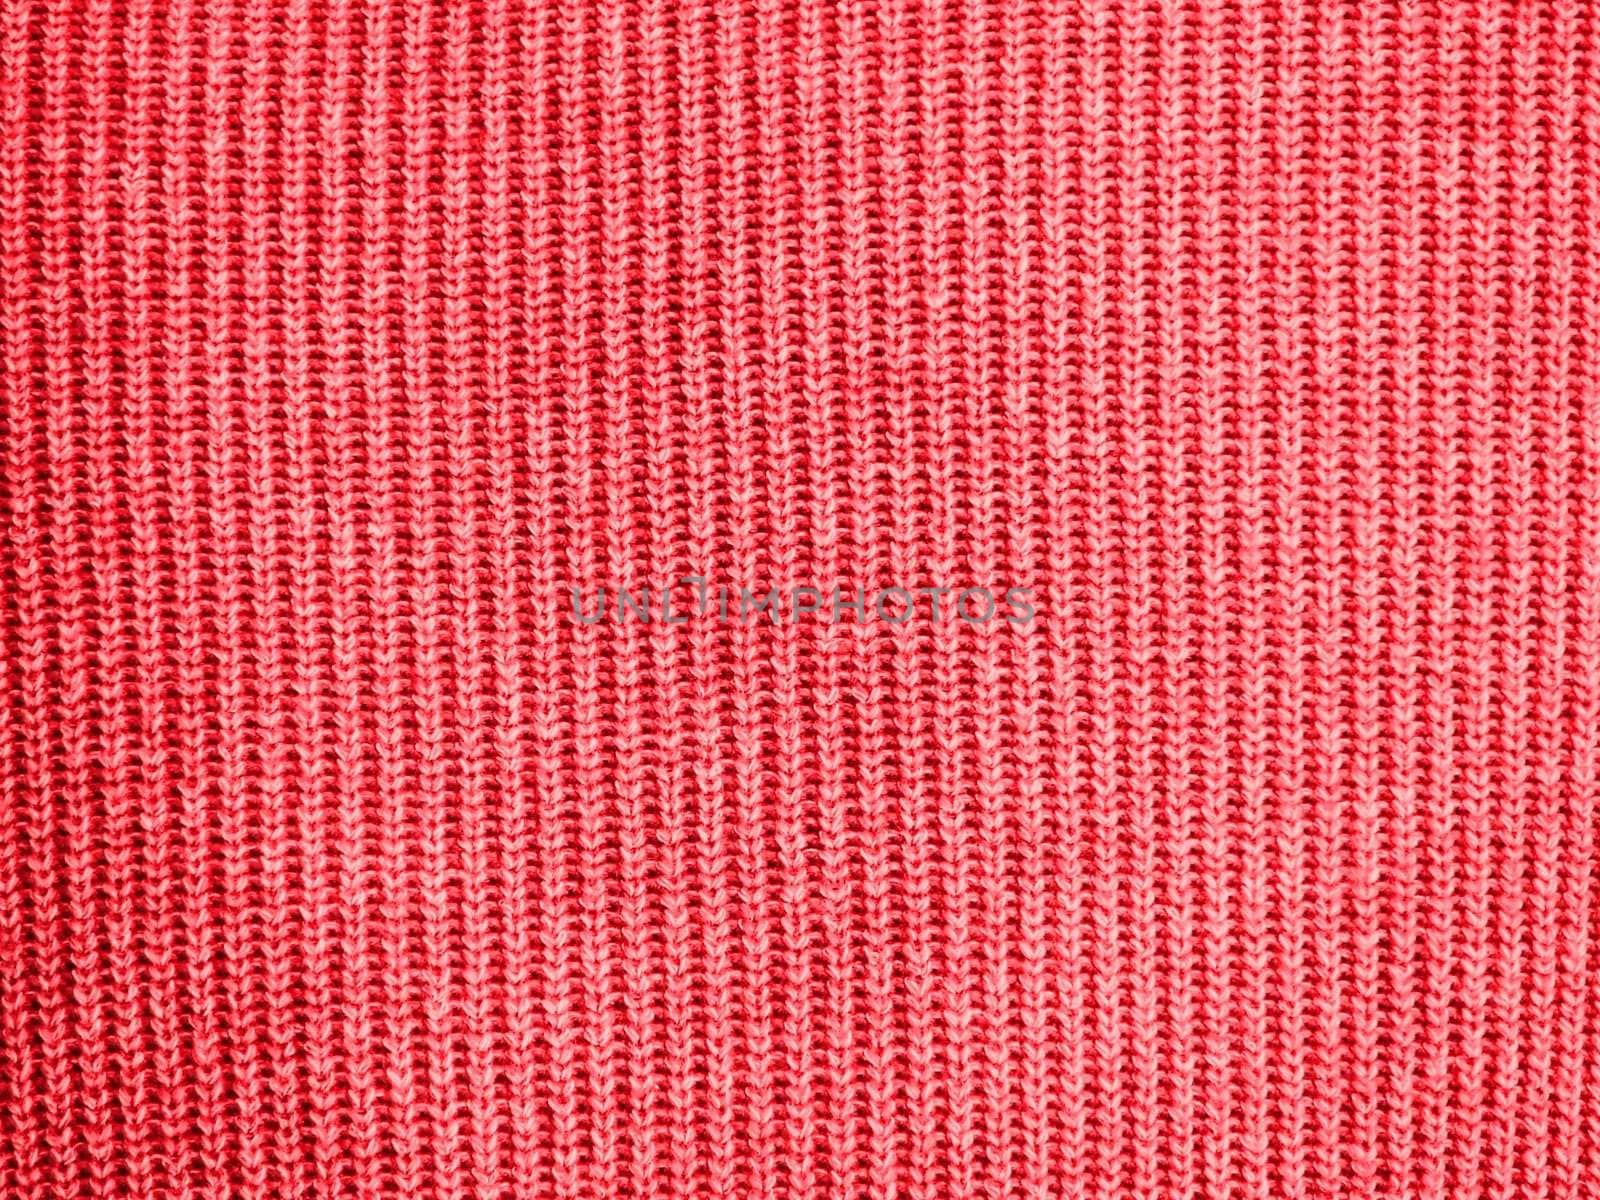 The photo shows a fragment of a wool sweater